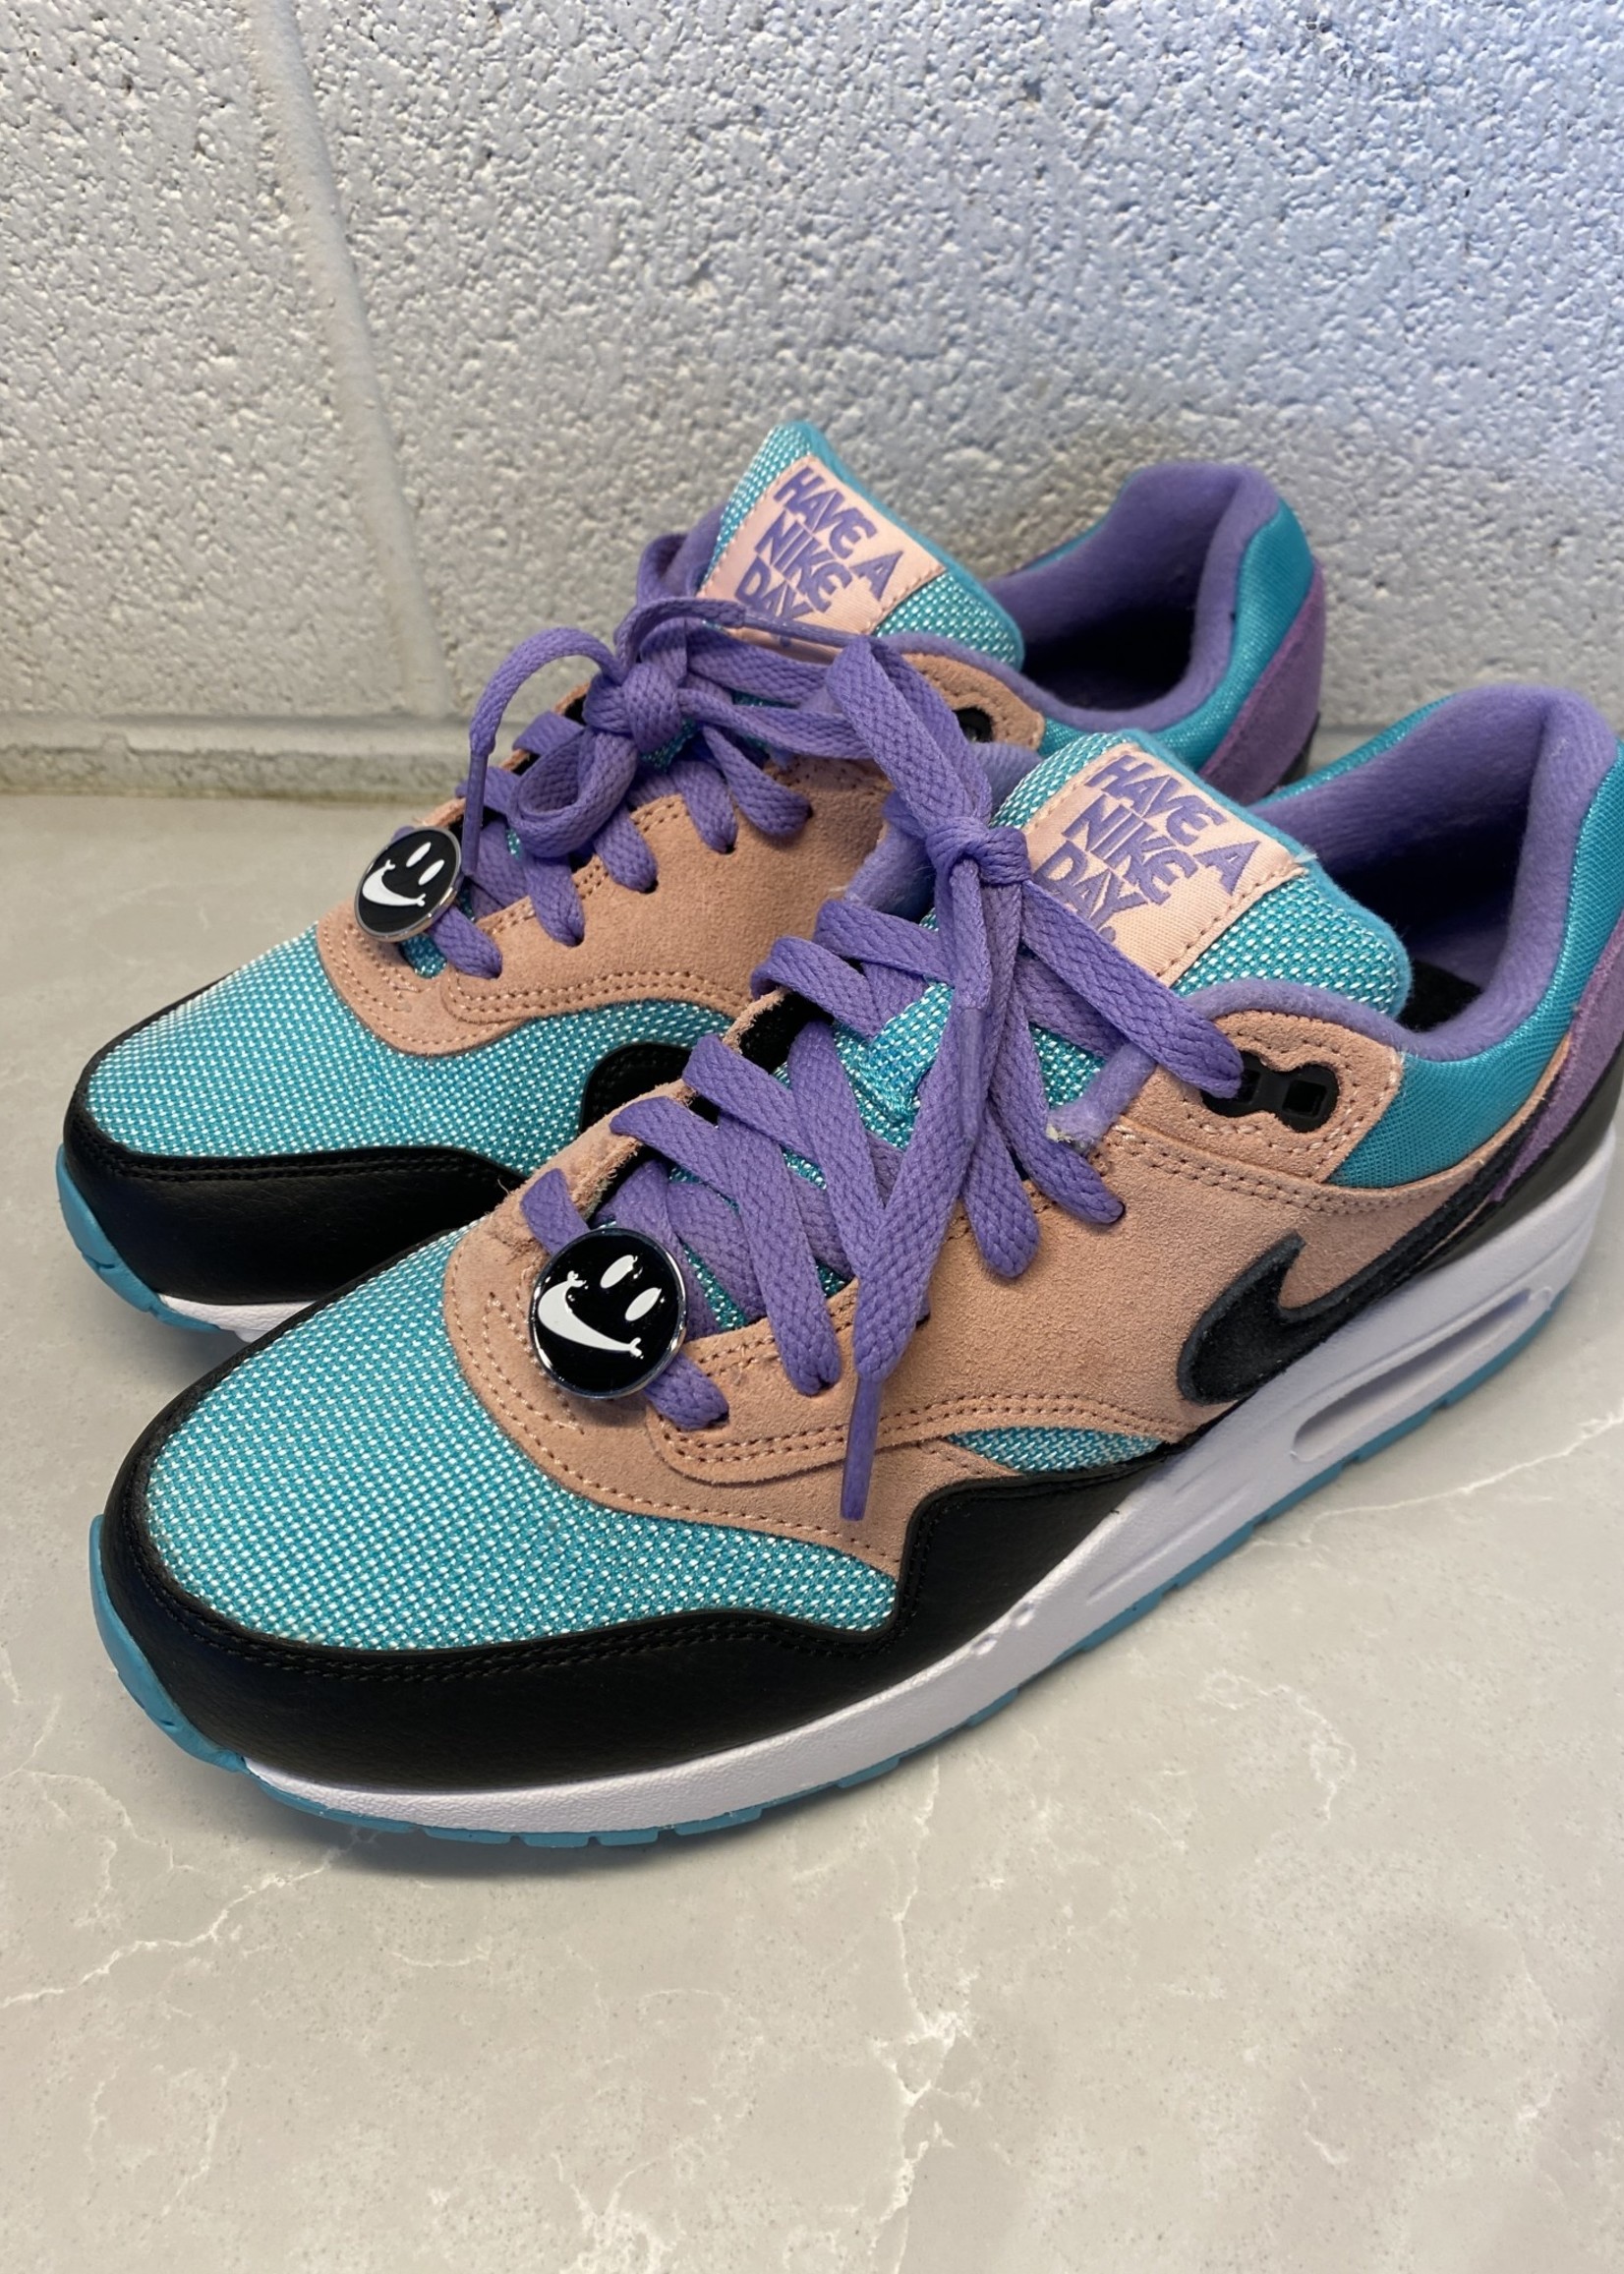 Nike Air Max 1Have a Nike Day (GS) 6.5Y (8)